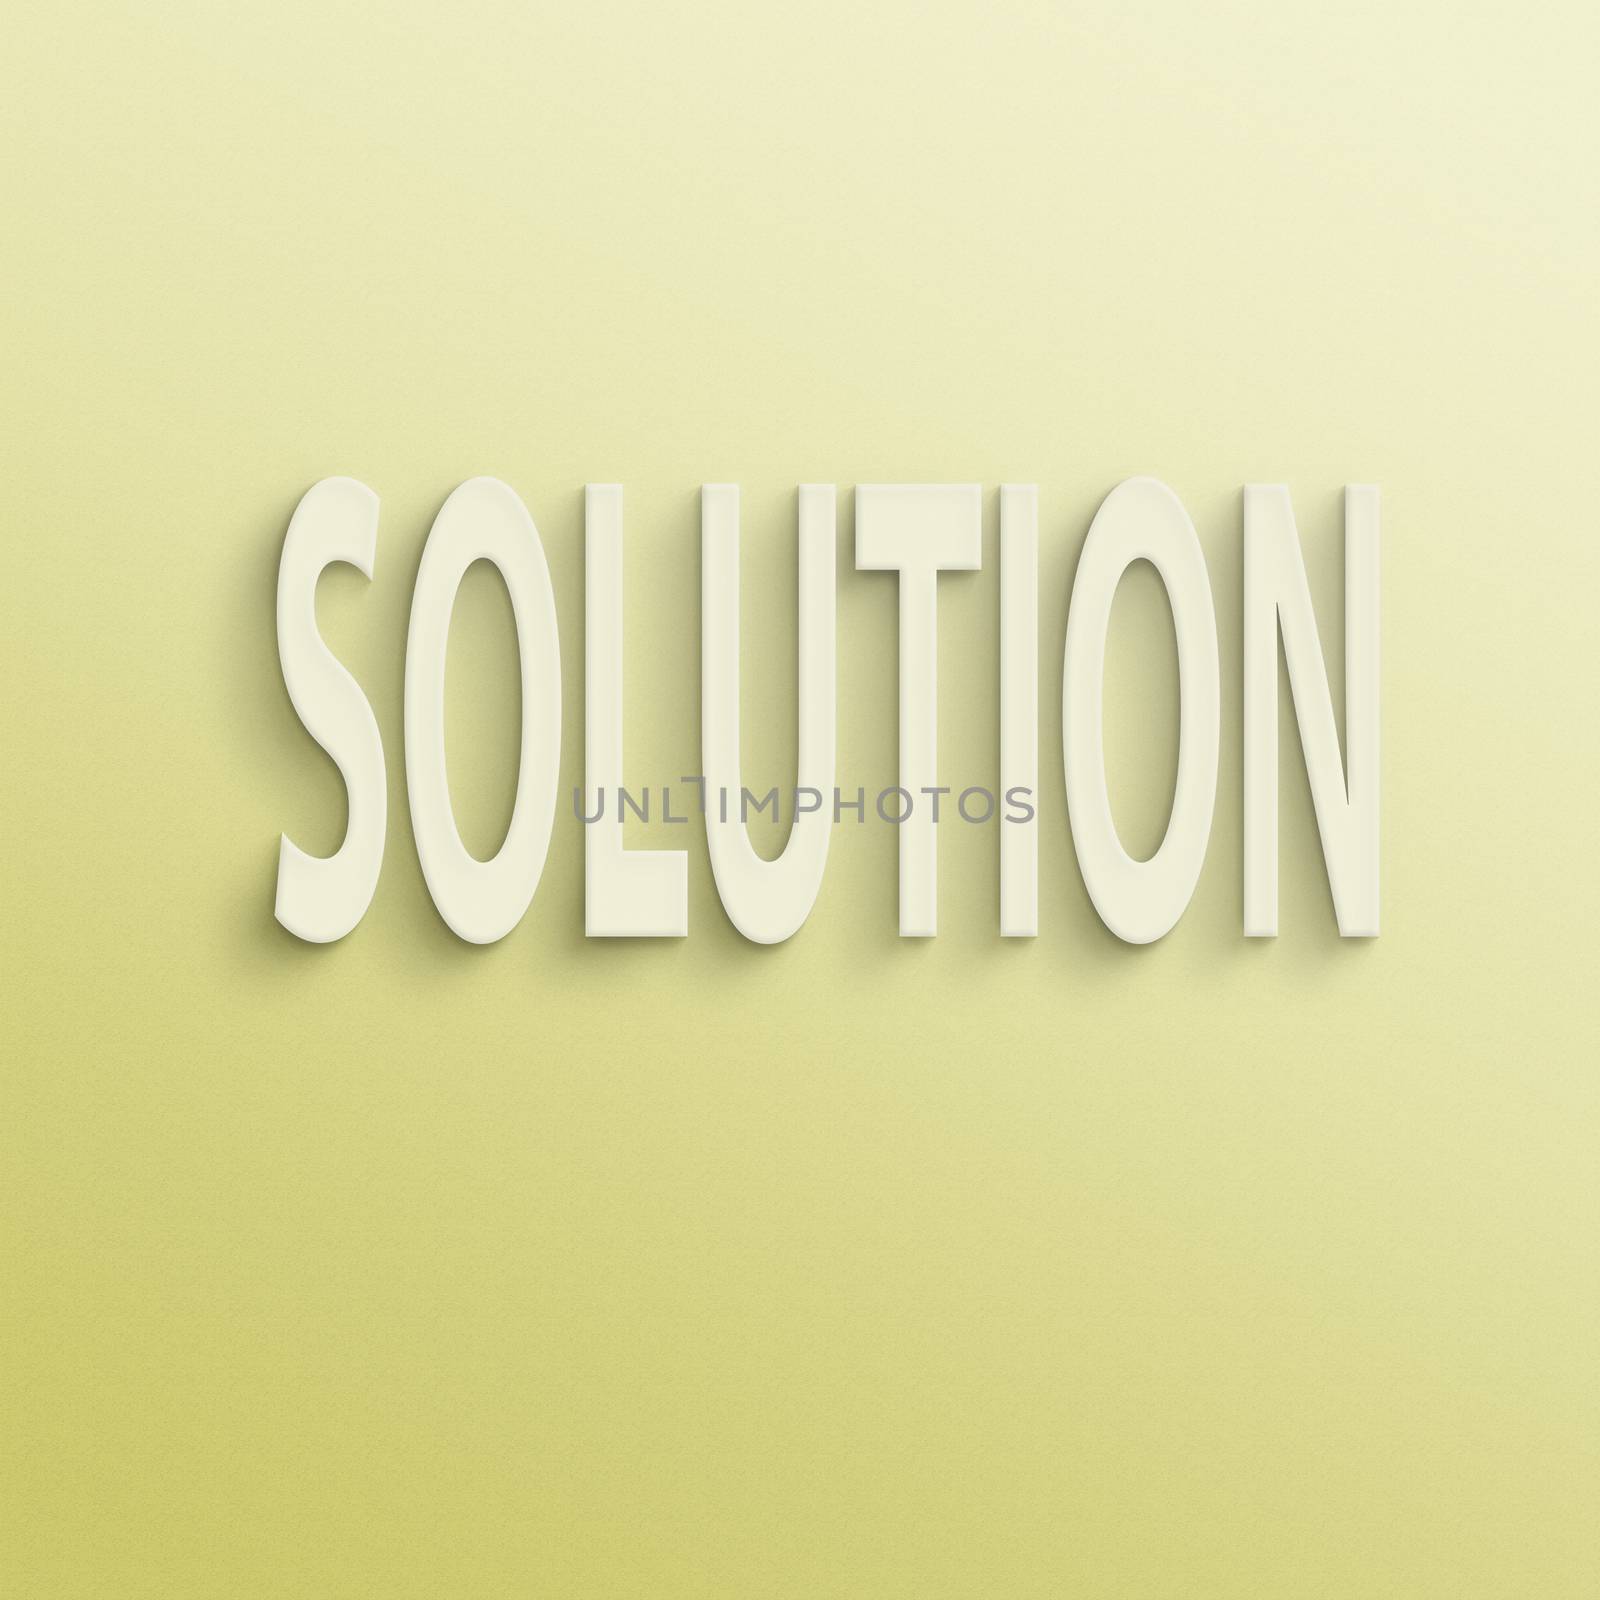 text on the wall or paper, solution